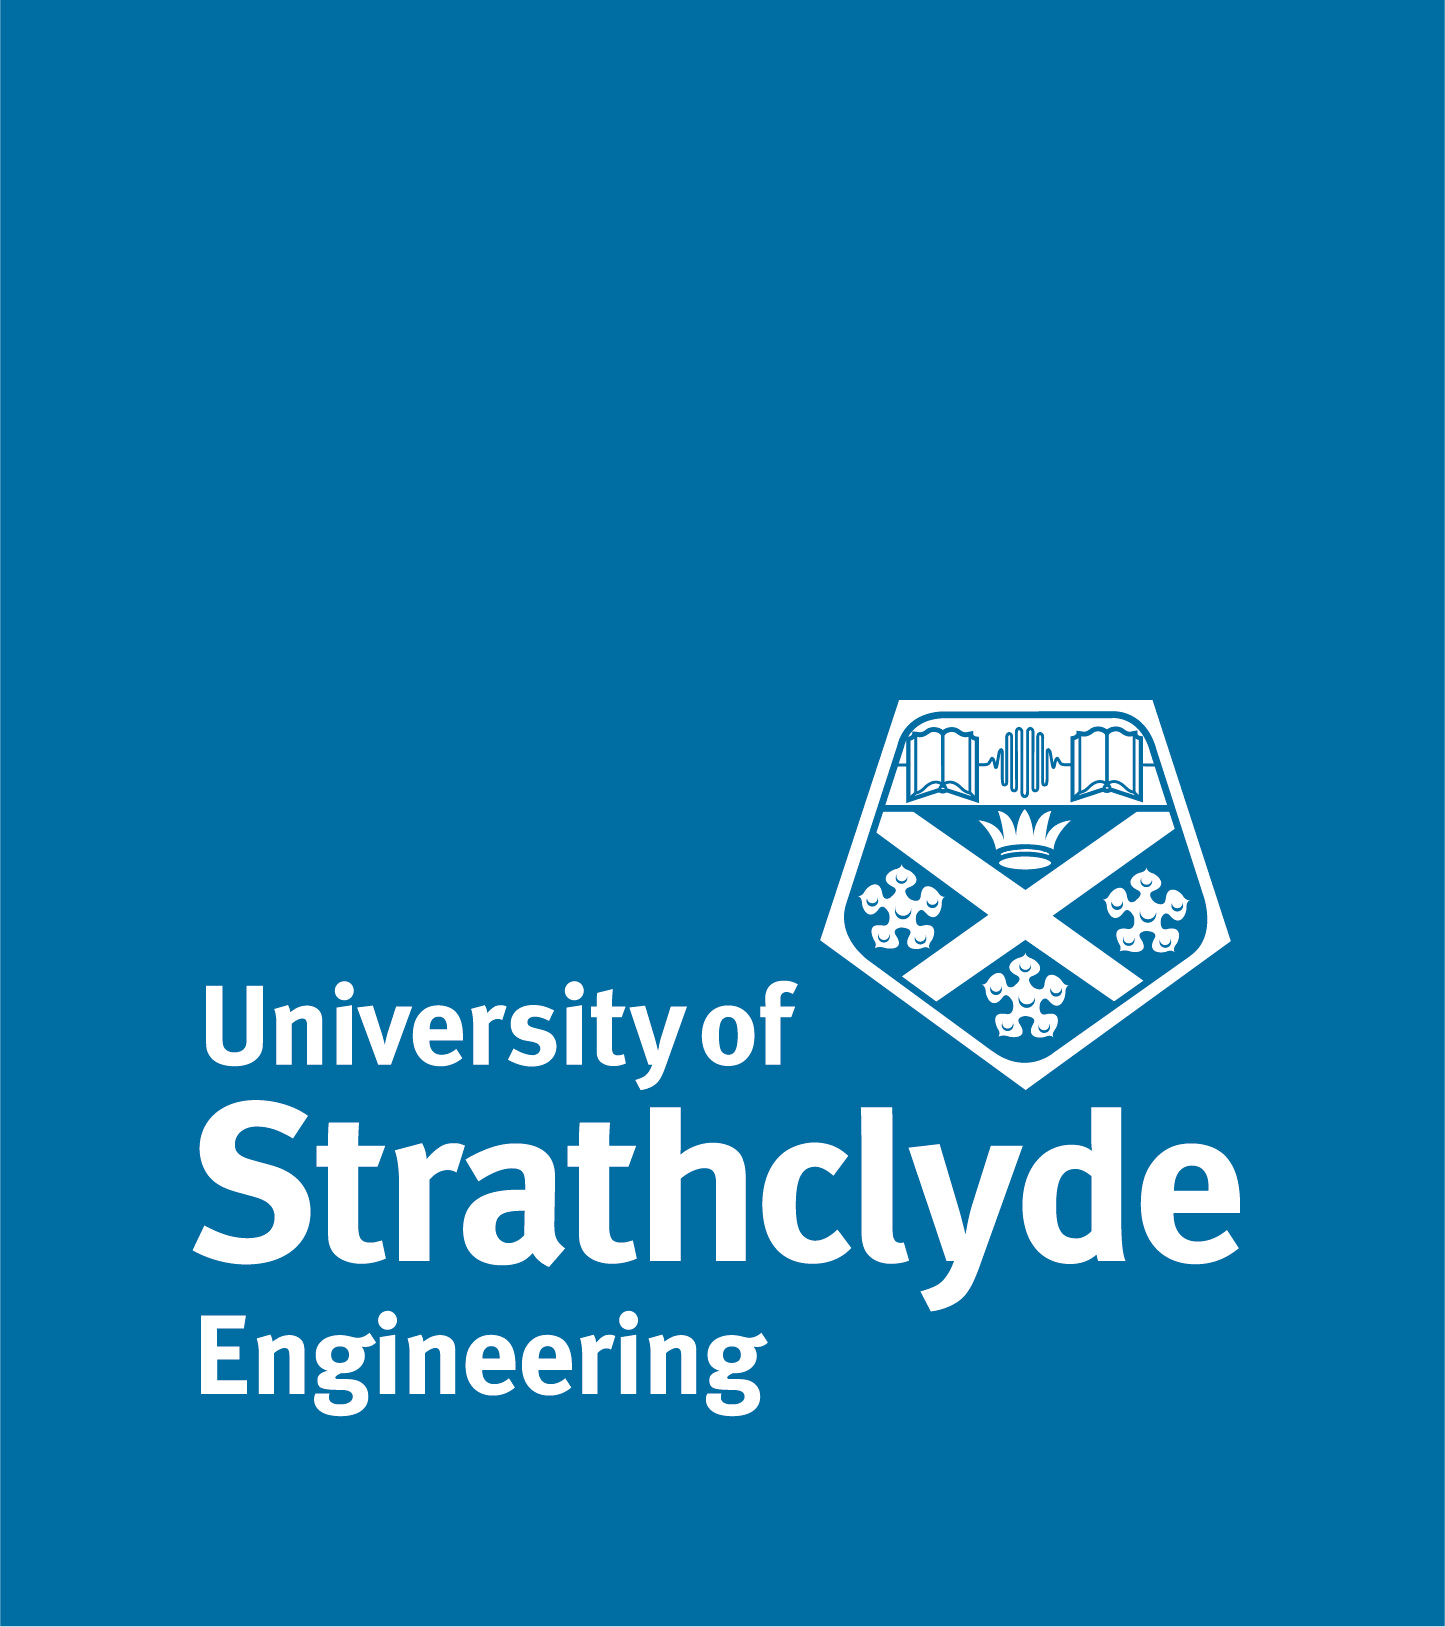 Blue background with white text and Strathclyde badge.  Text reads University of Strathclyde Engineering